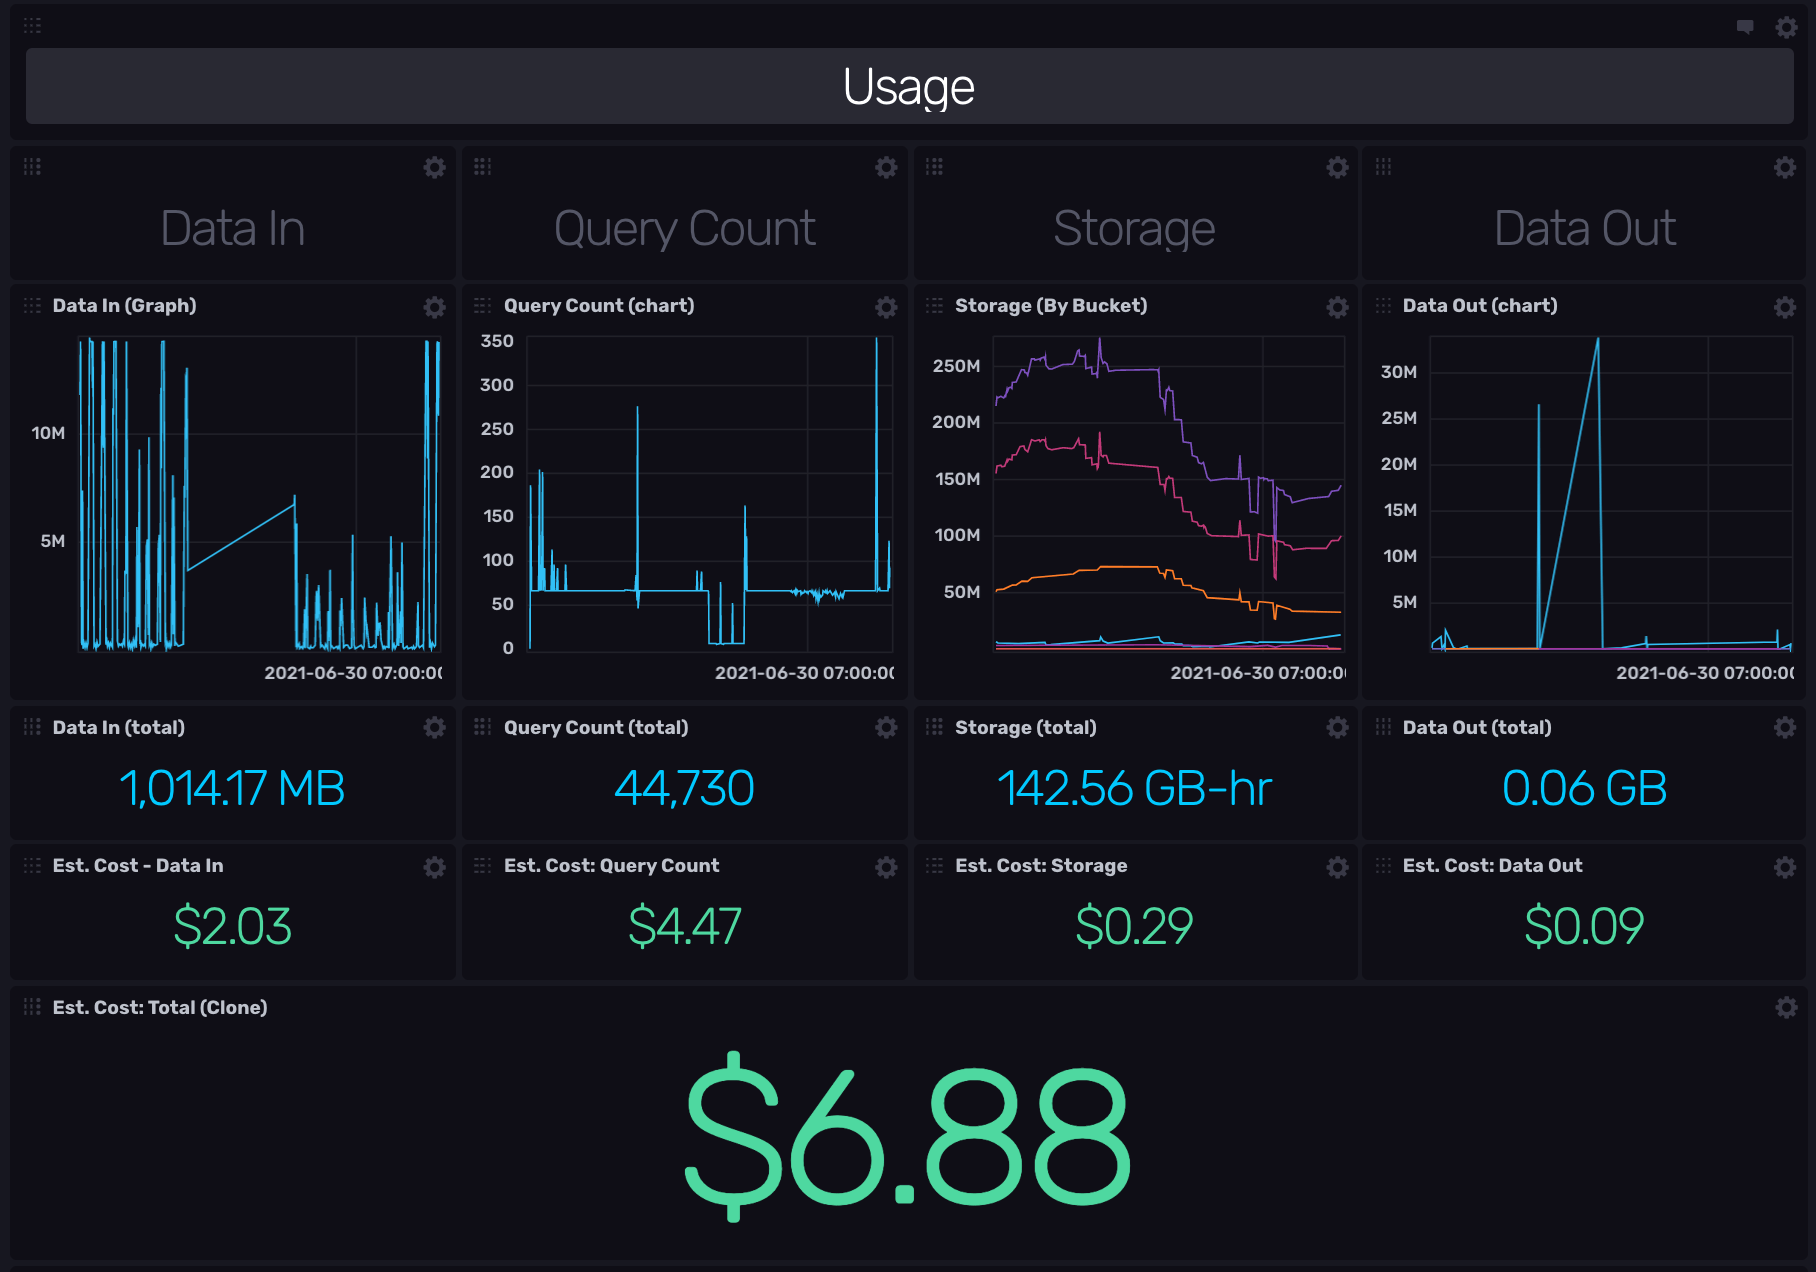 Usage Dashboard with estimated costs